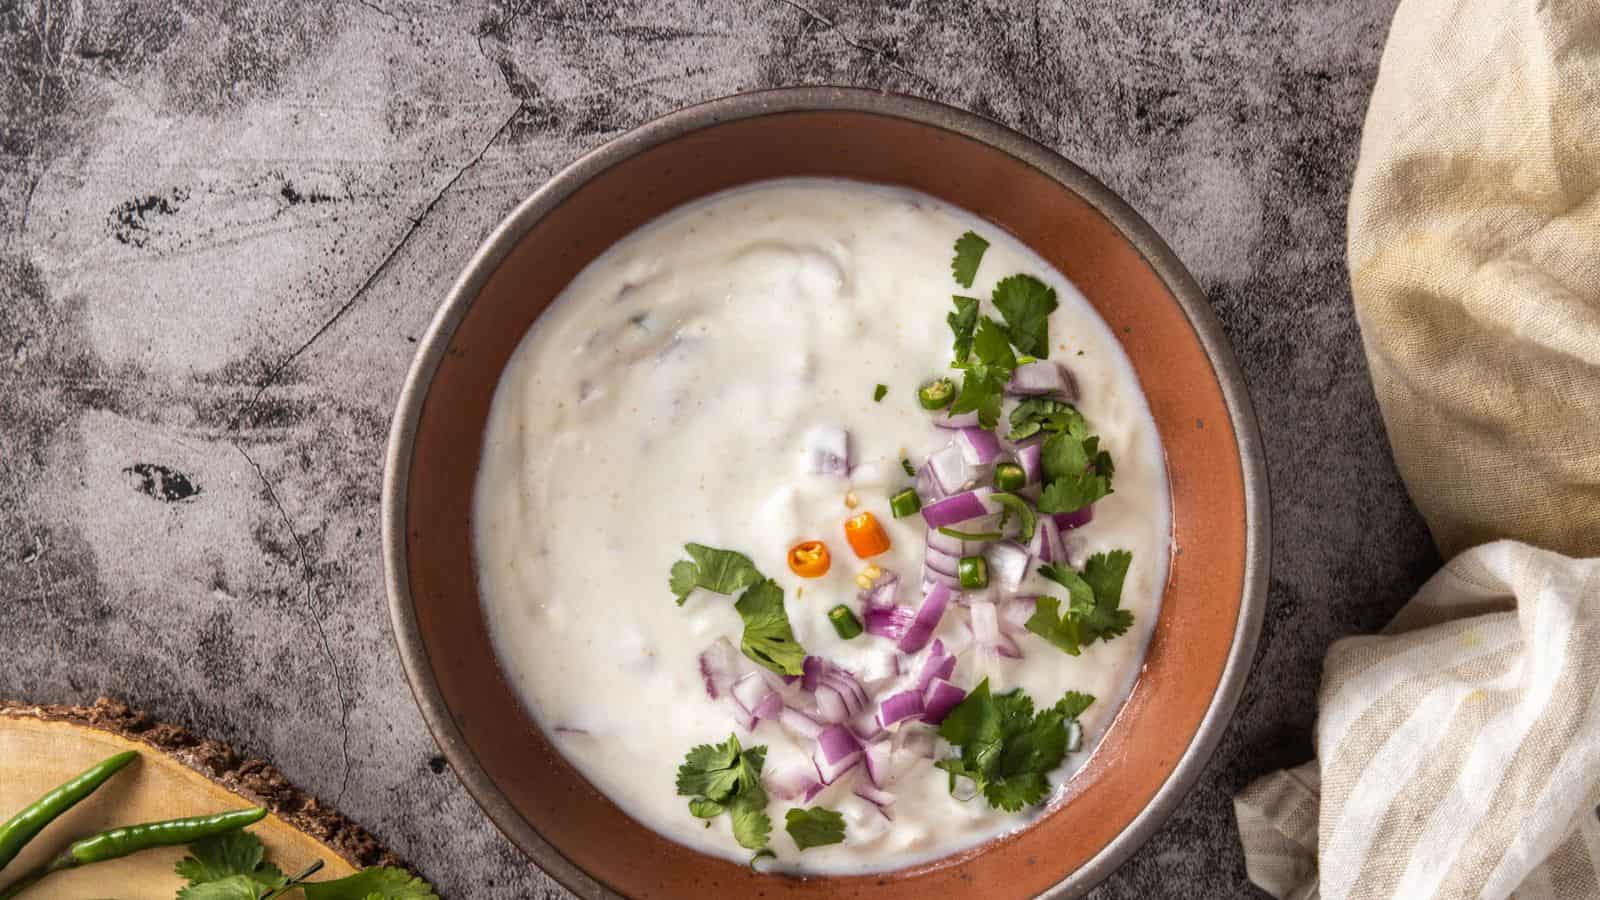 An overhead view of homemade raita served in a brown bowl.